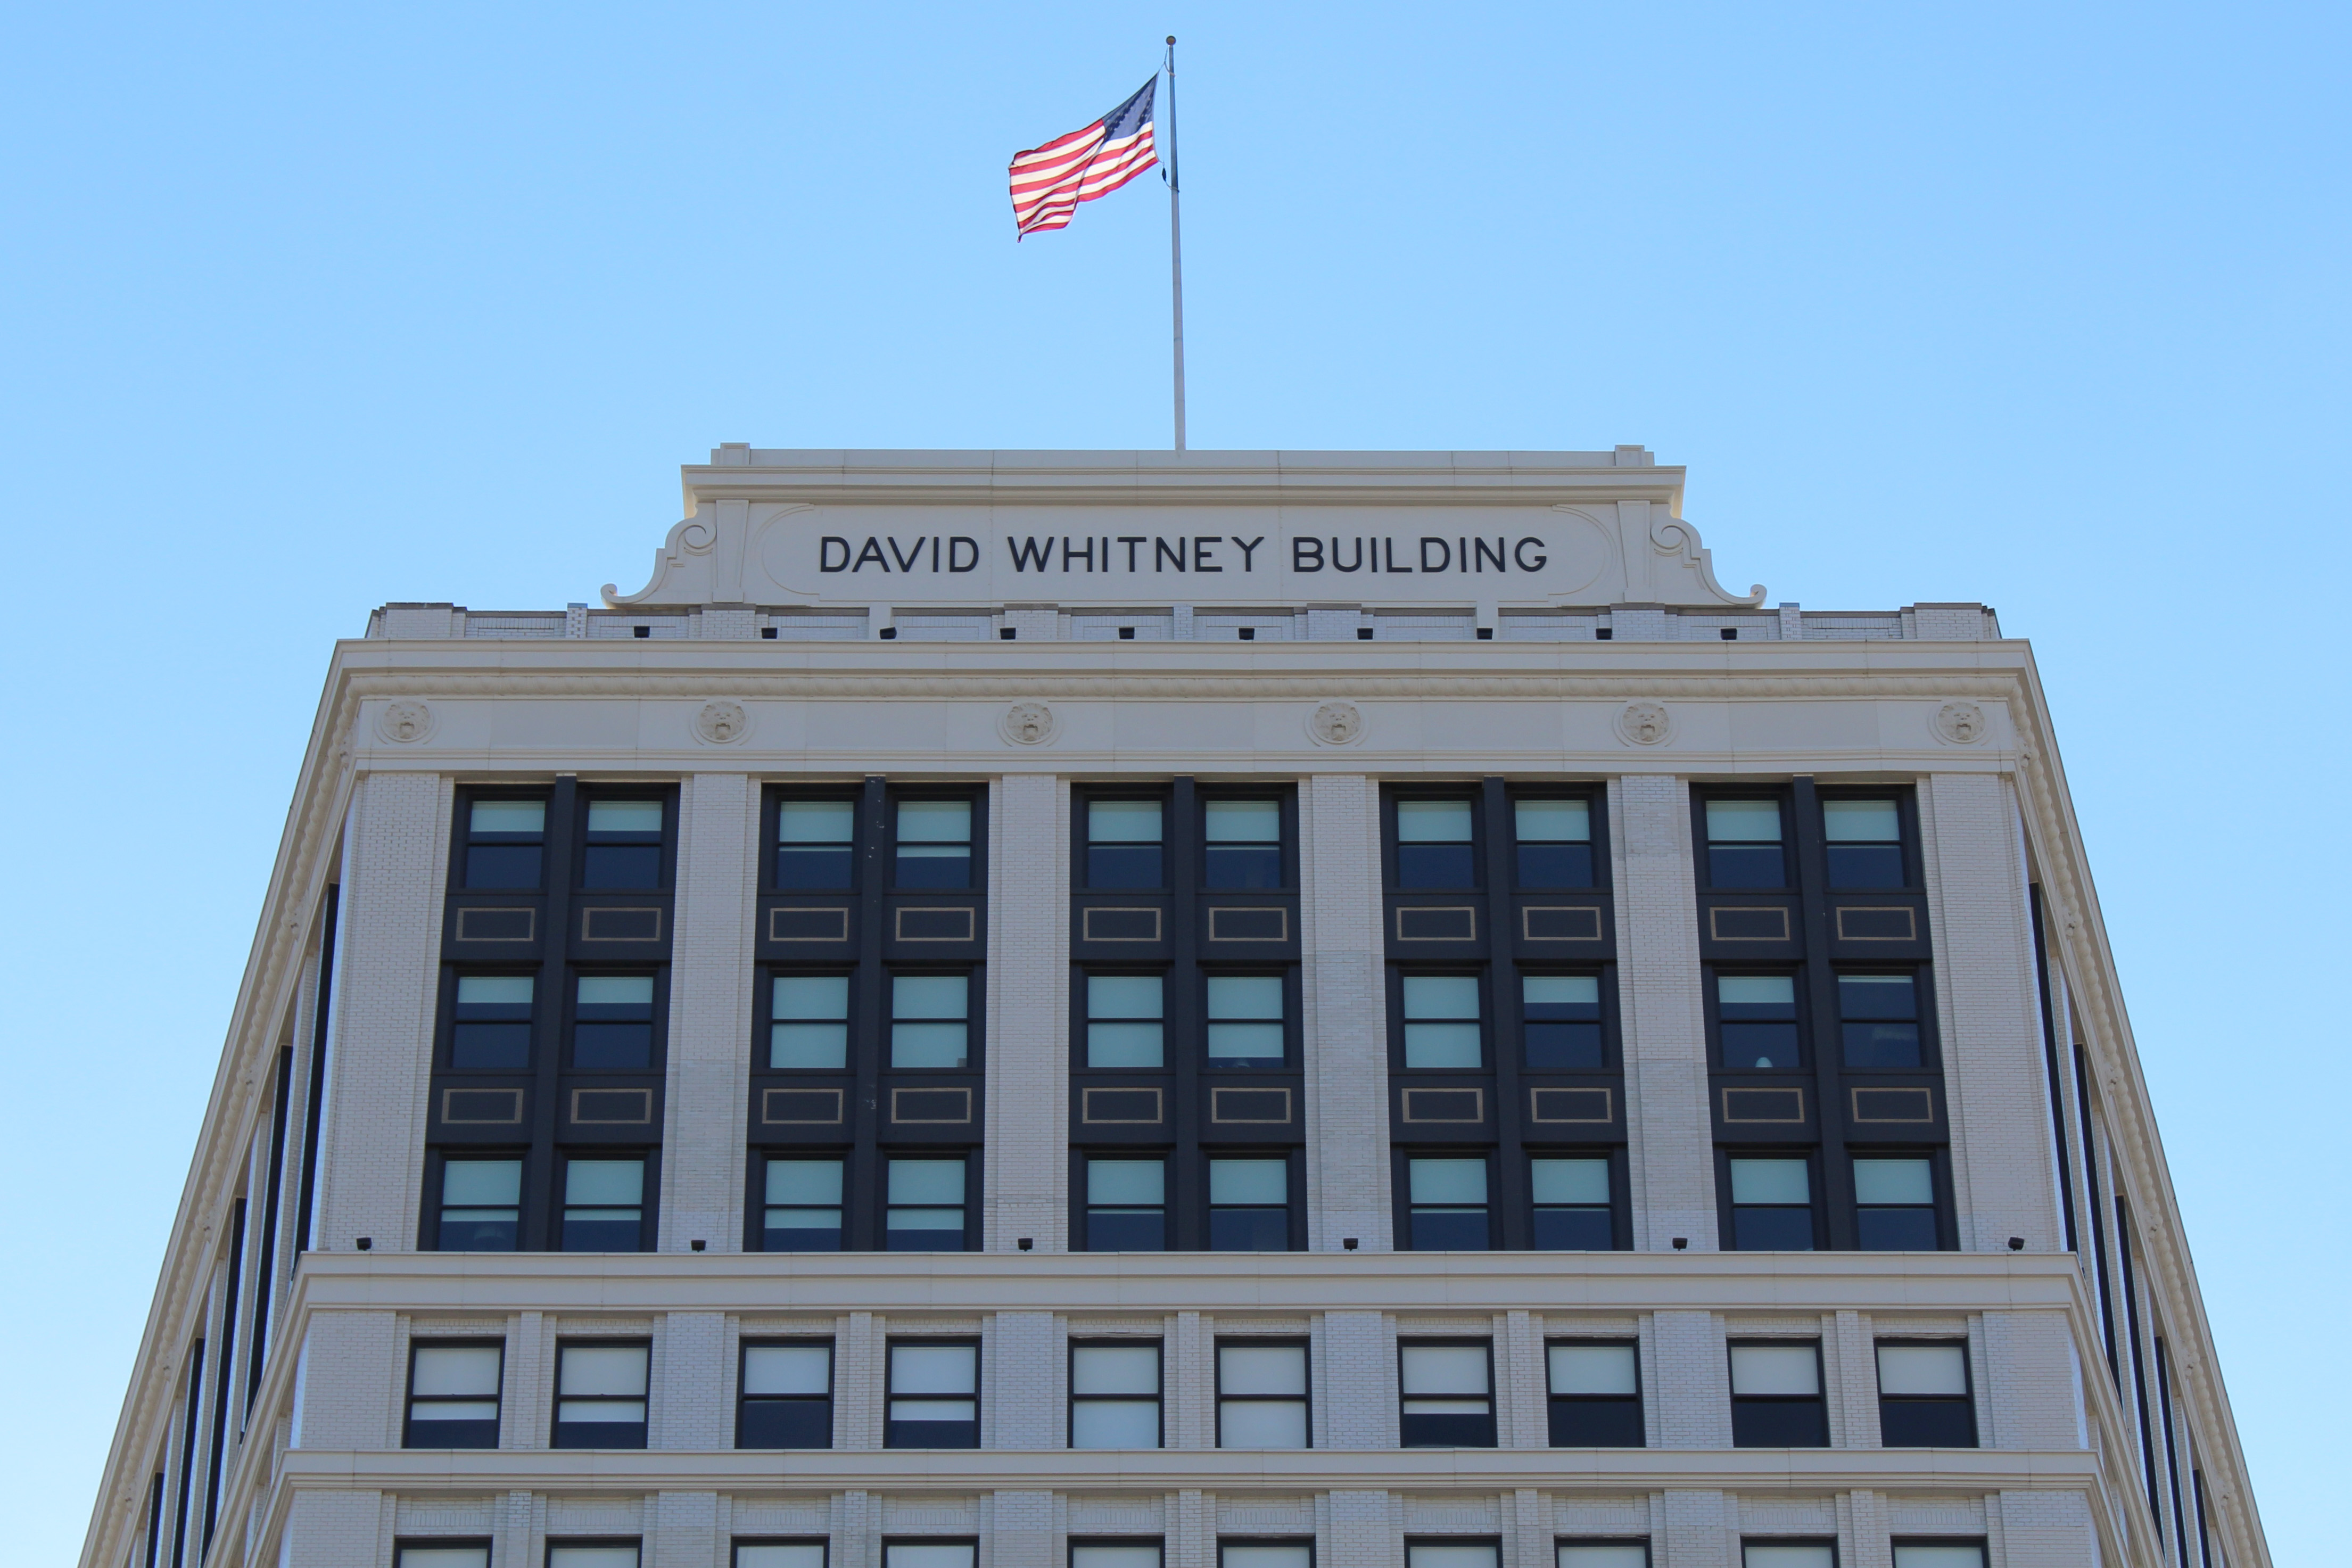 The David Whitney’s renovation include a cornice, pediment sign, and lions’ heads made by Glassline